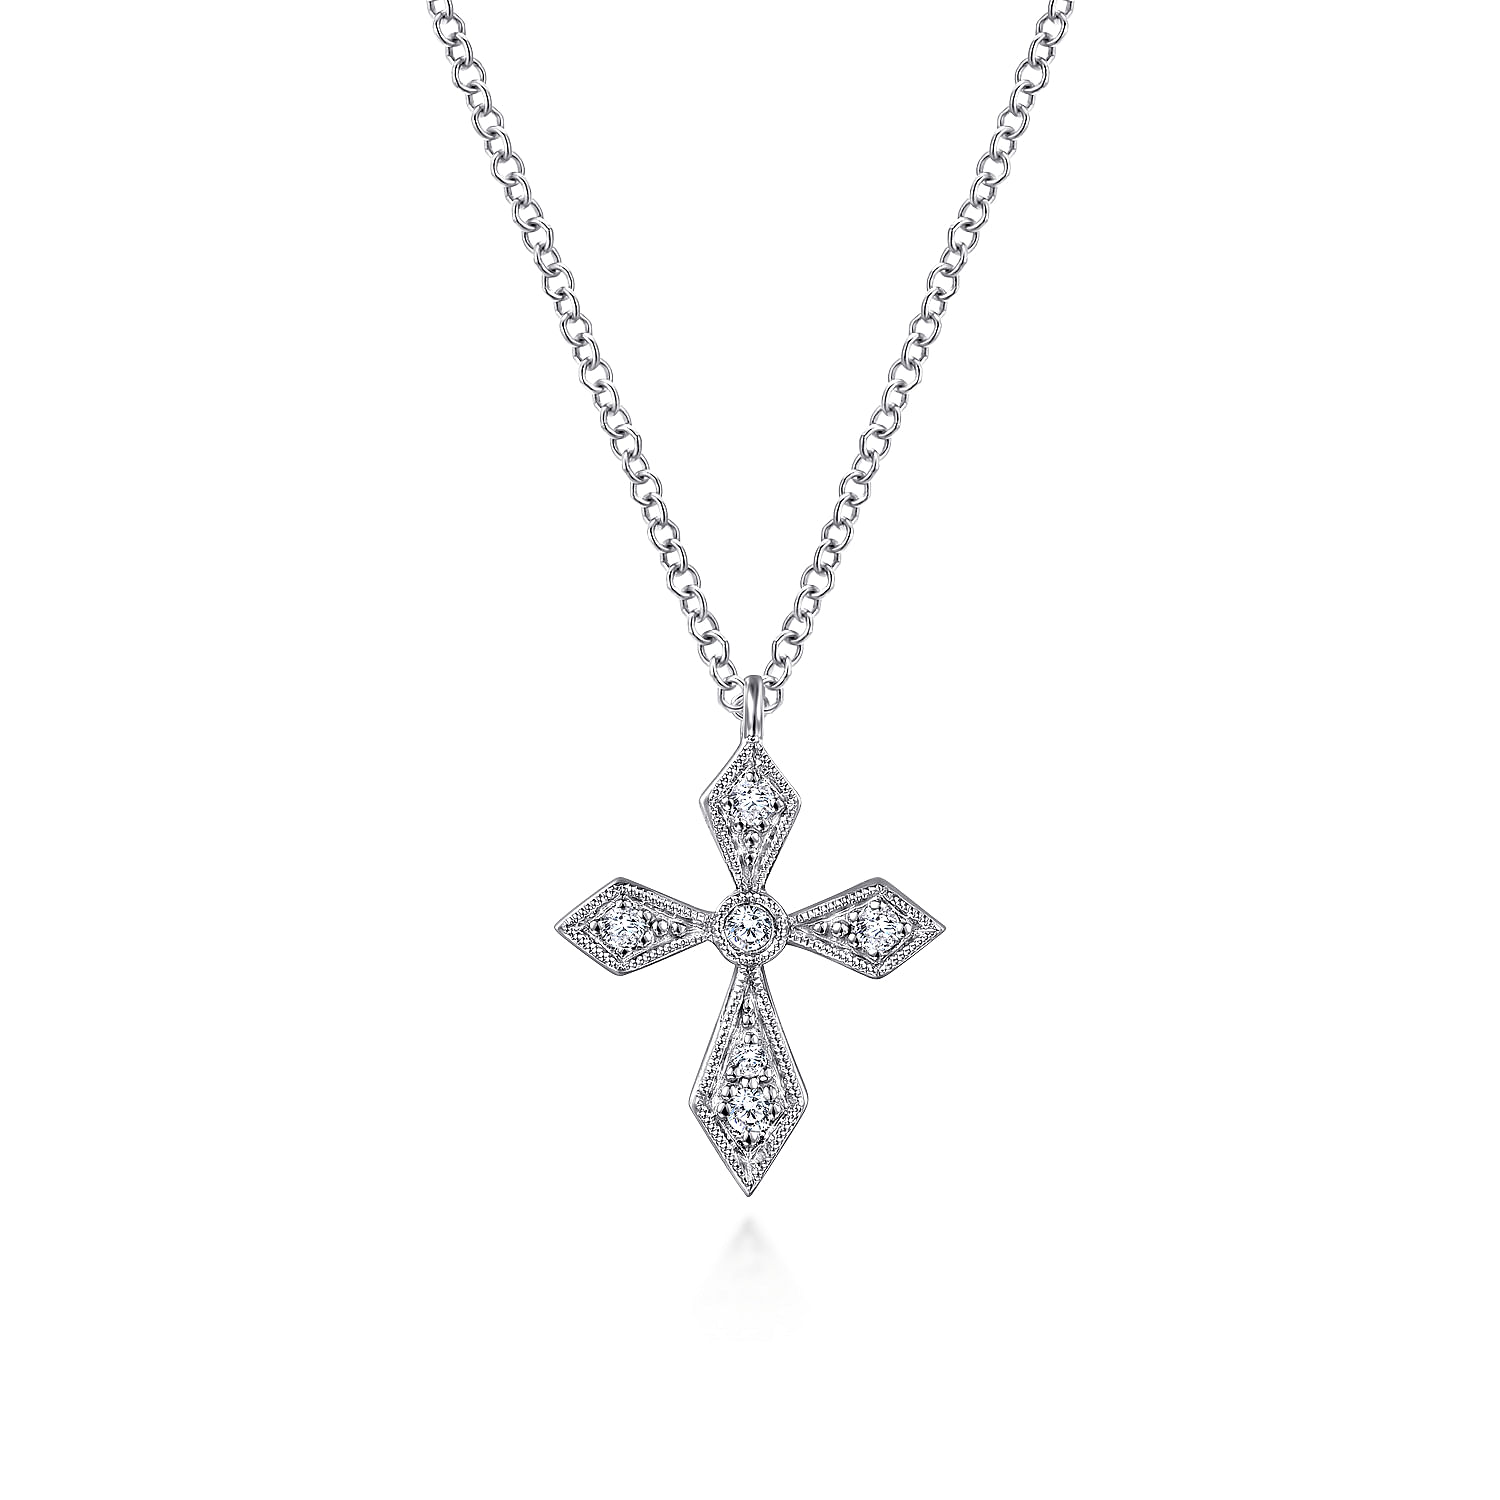 Gabriel - Vintage Inspired 14K White Gold Pointed Diamond Cross Pendant Necklace